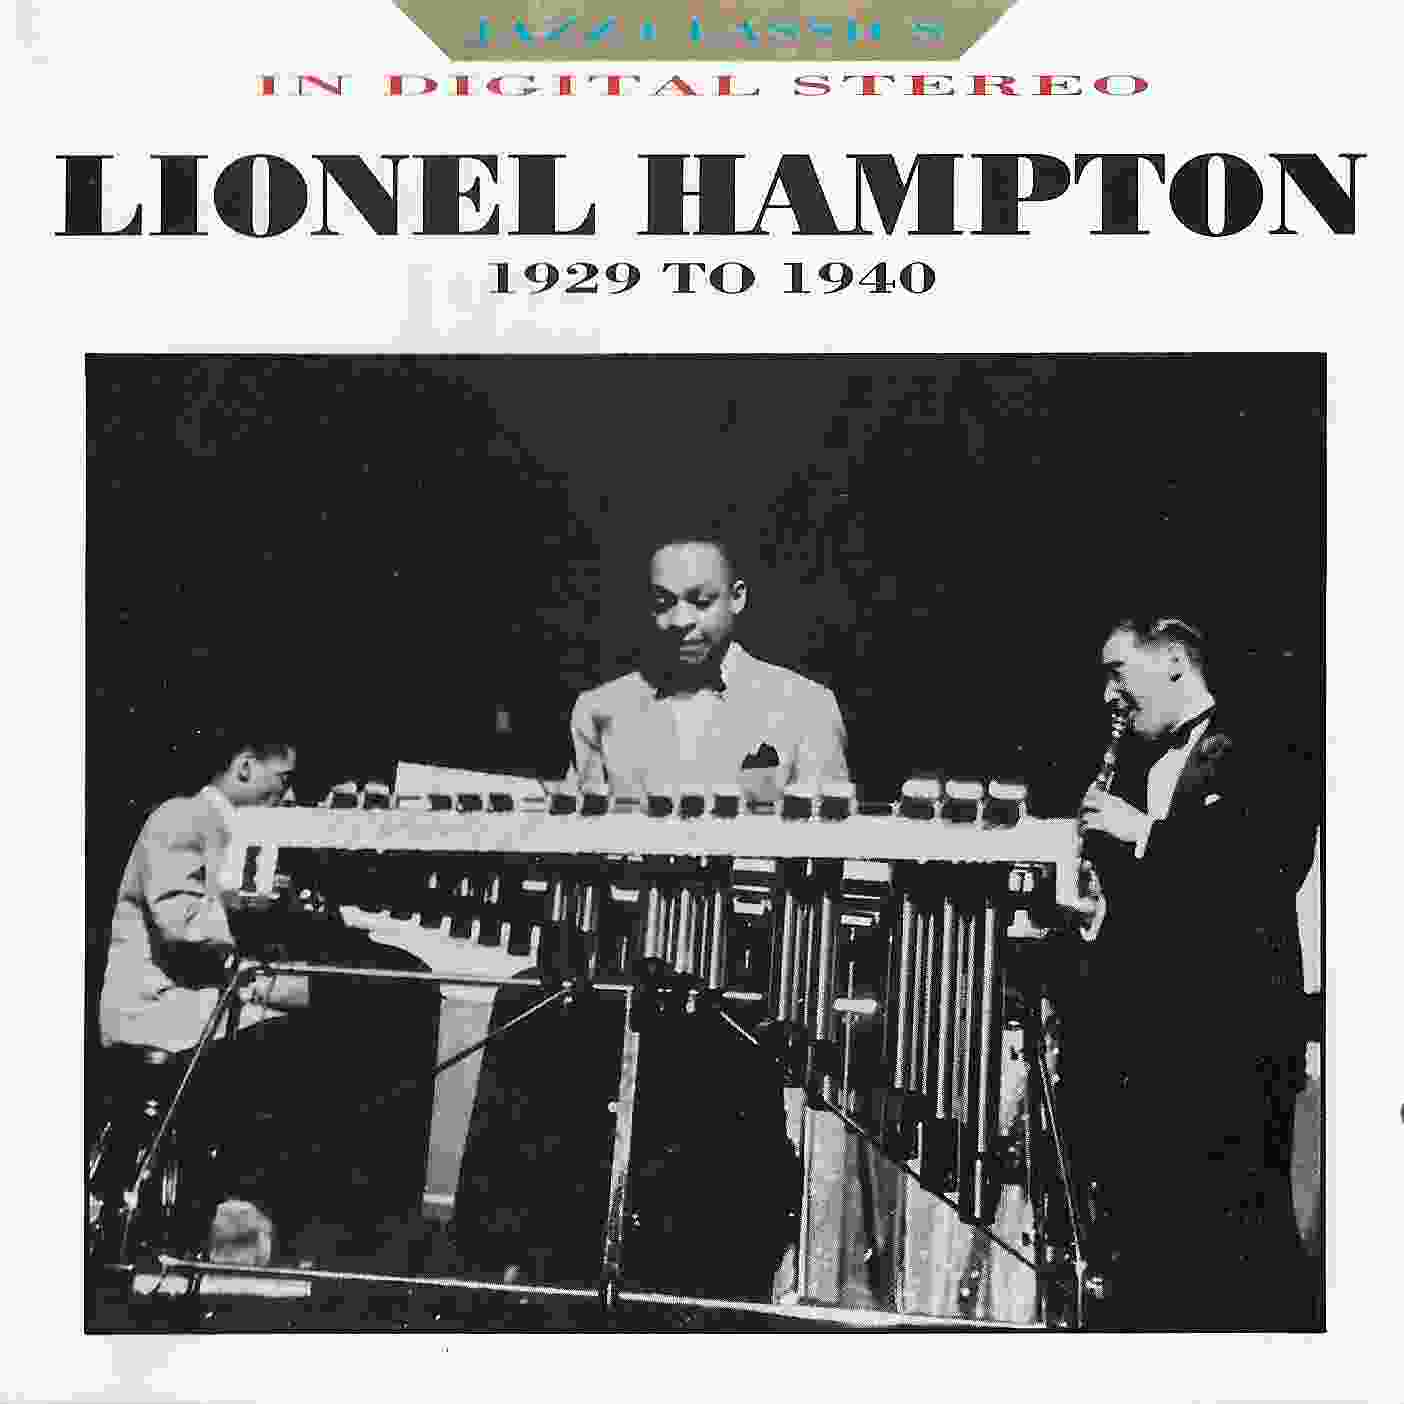 Picture of RPCD 852 Lionel Hampton 1929 - 1940 by artist Lionel Hampton from the BBC cds - Records and Tapes library